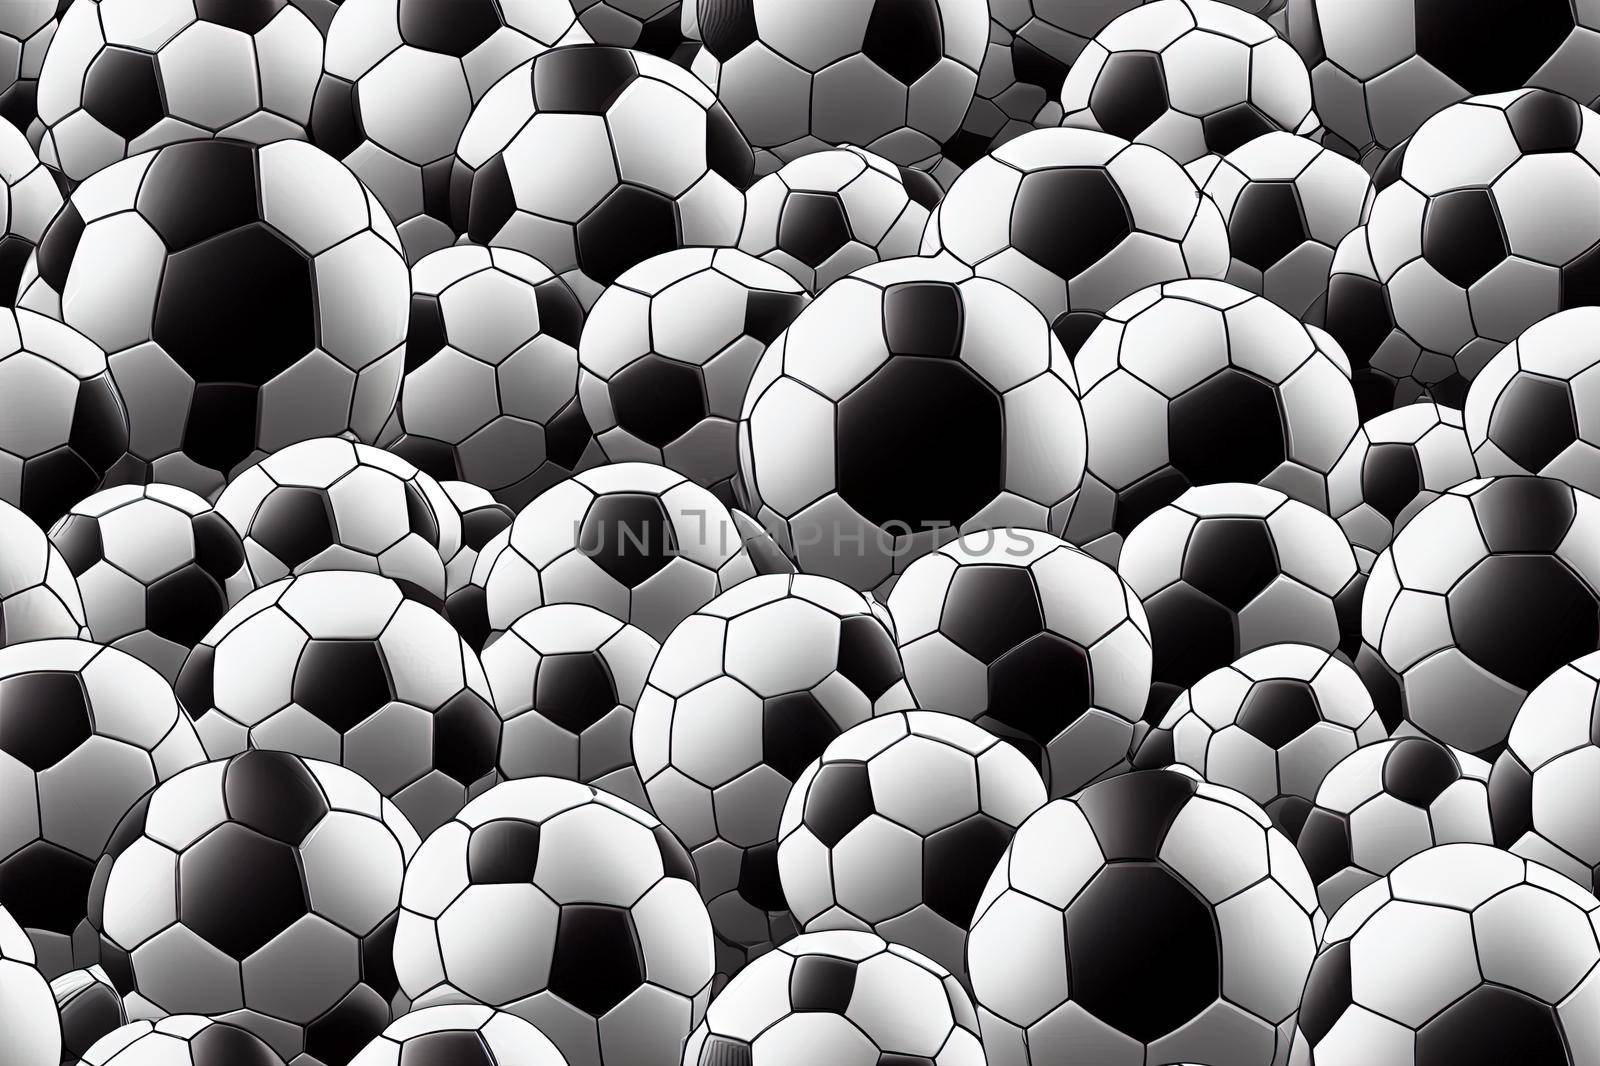 Seamless background of white and black football soccer ball High quality 2d illustration. by 2ragon